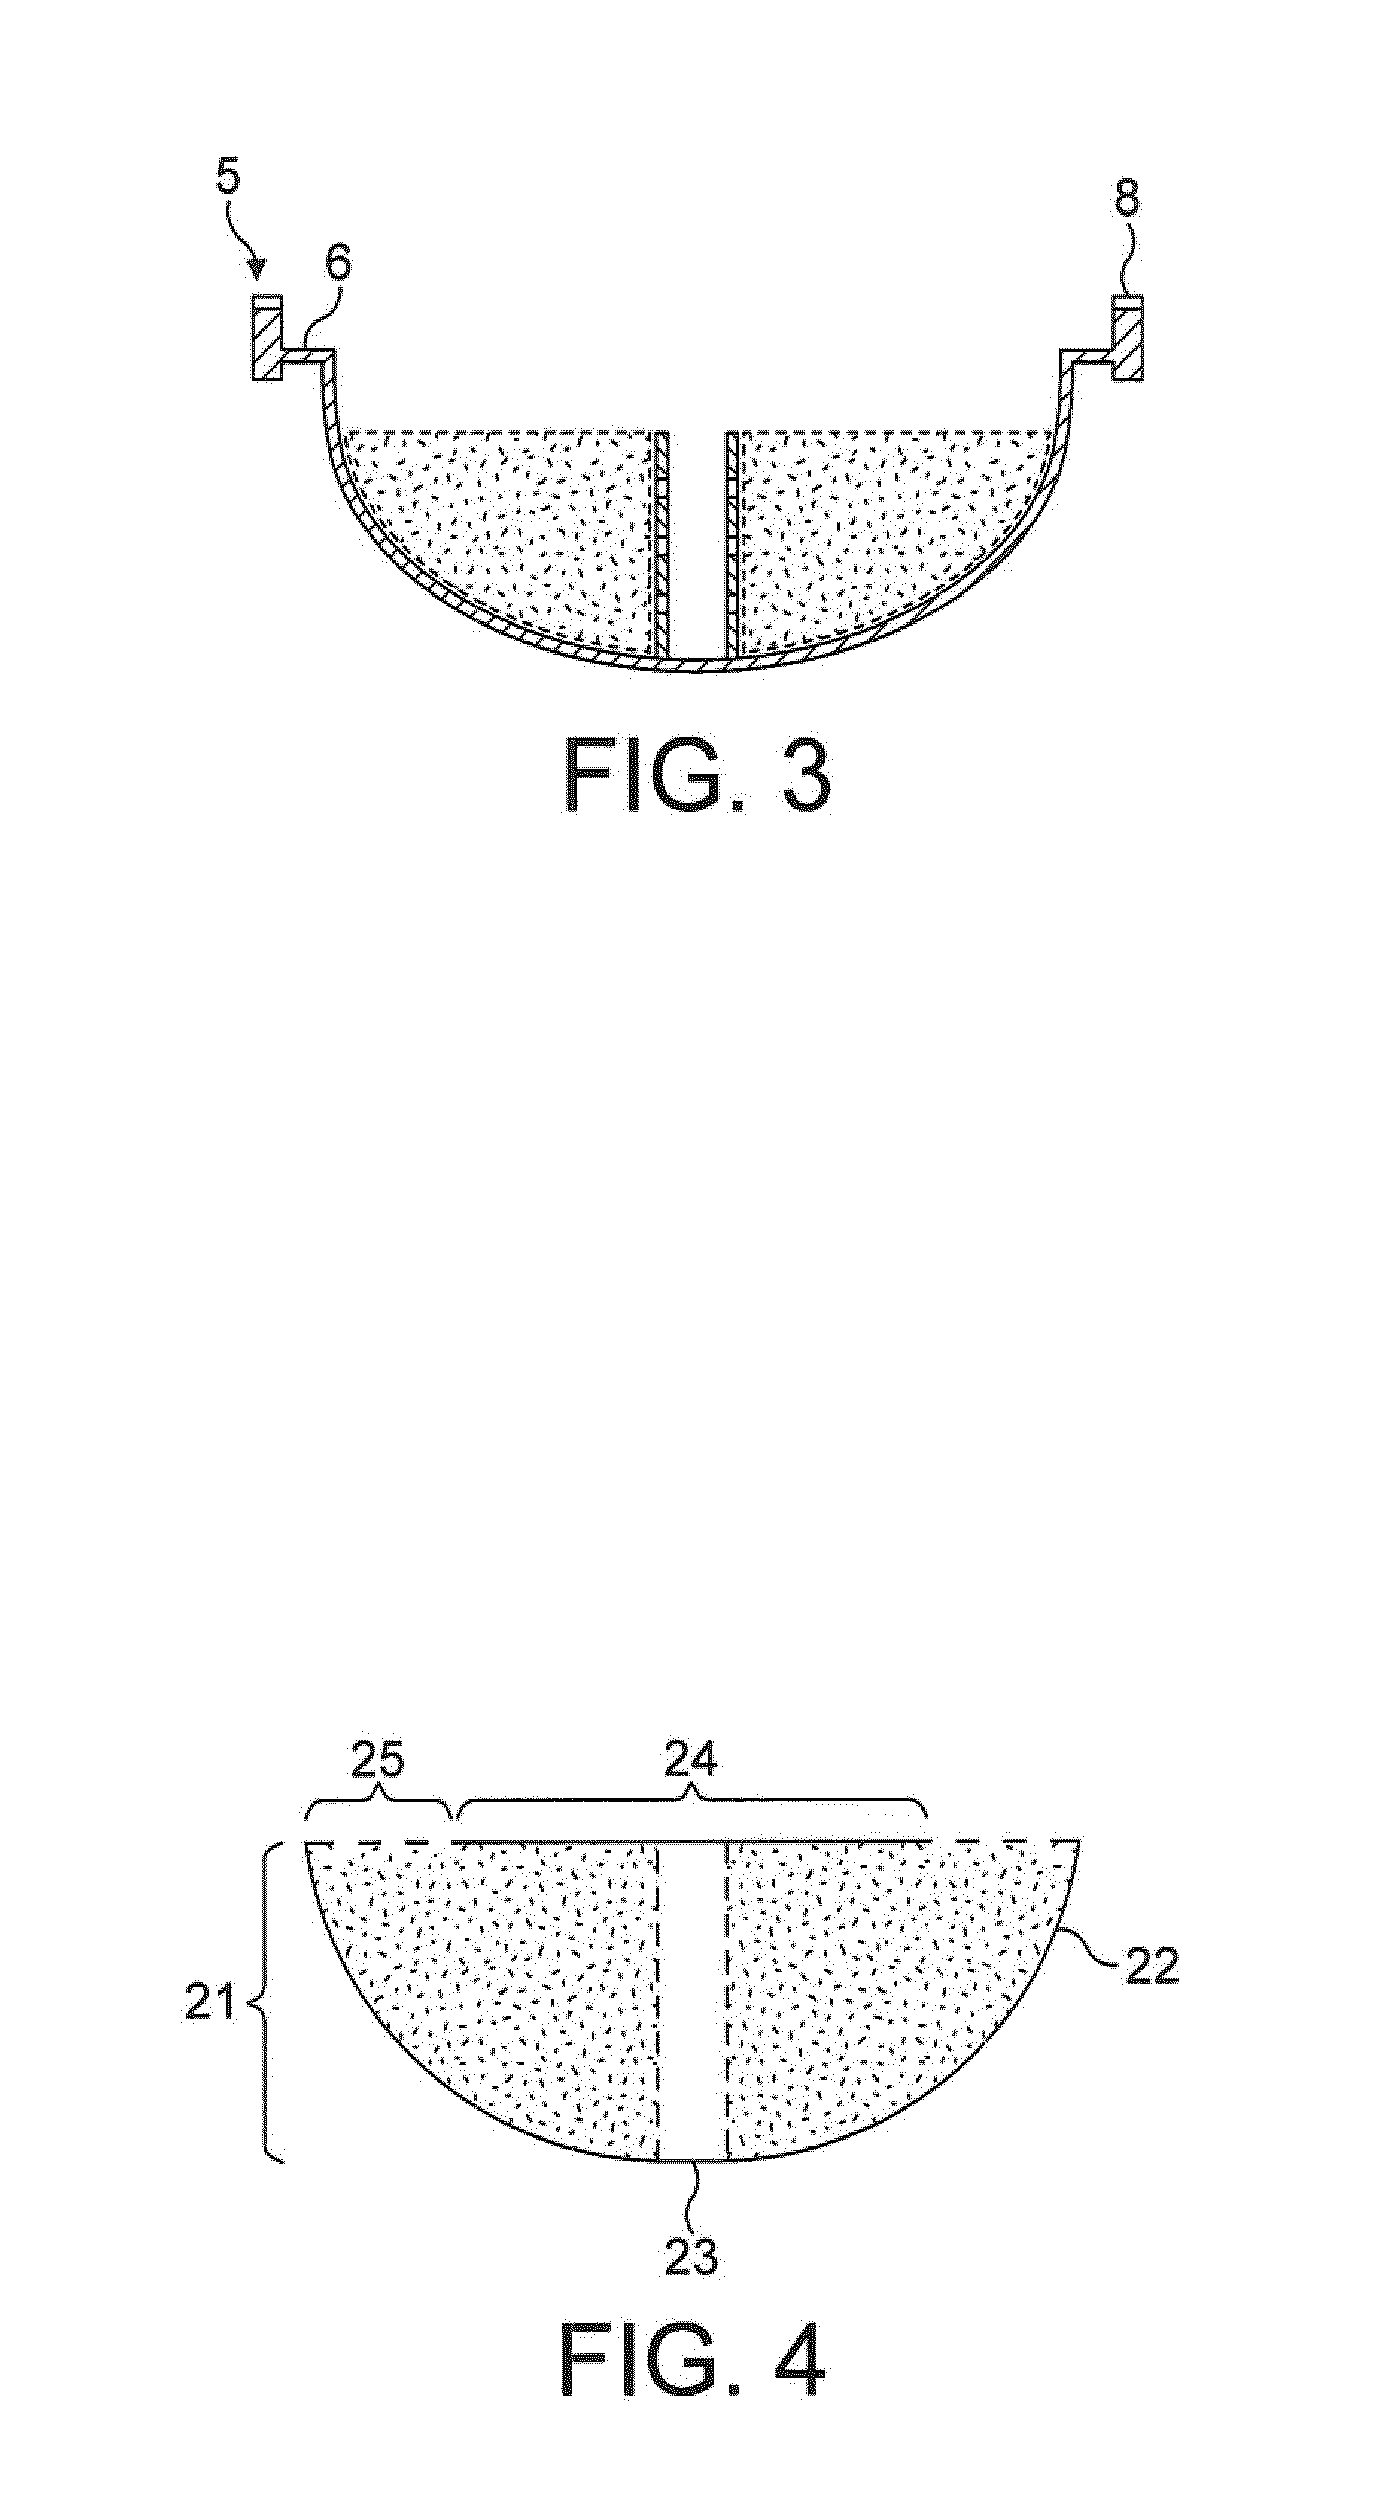 Kit for the preparation of a beverage in a centrifugal brewing device